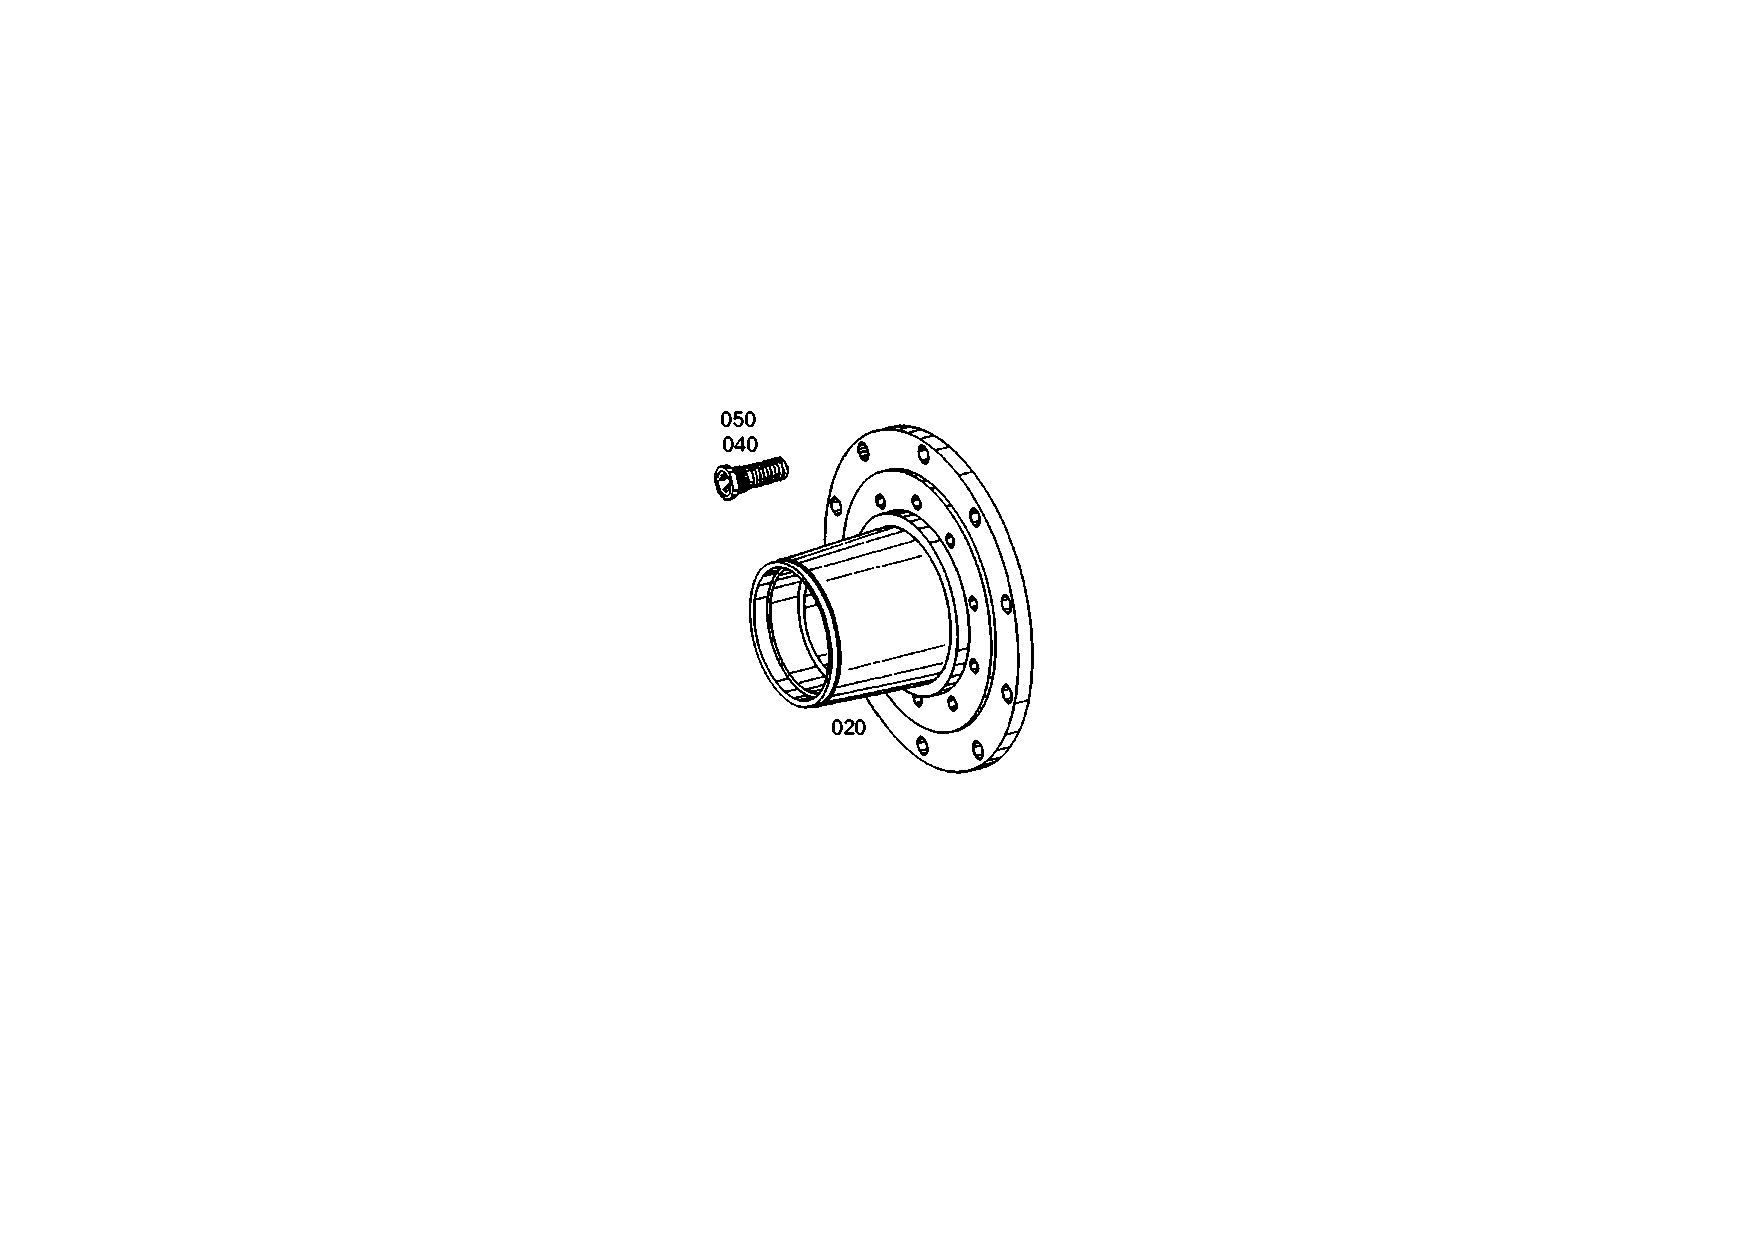 drawing for TEREX EQUIPMENT LIMITED 0204156 - WHEEL STUD (figure 2)